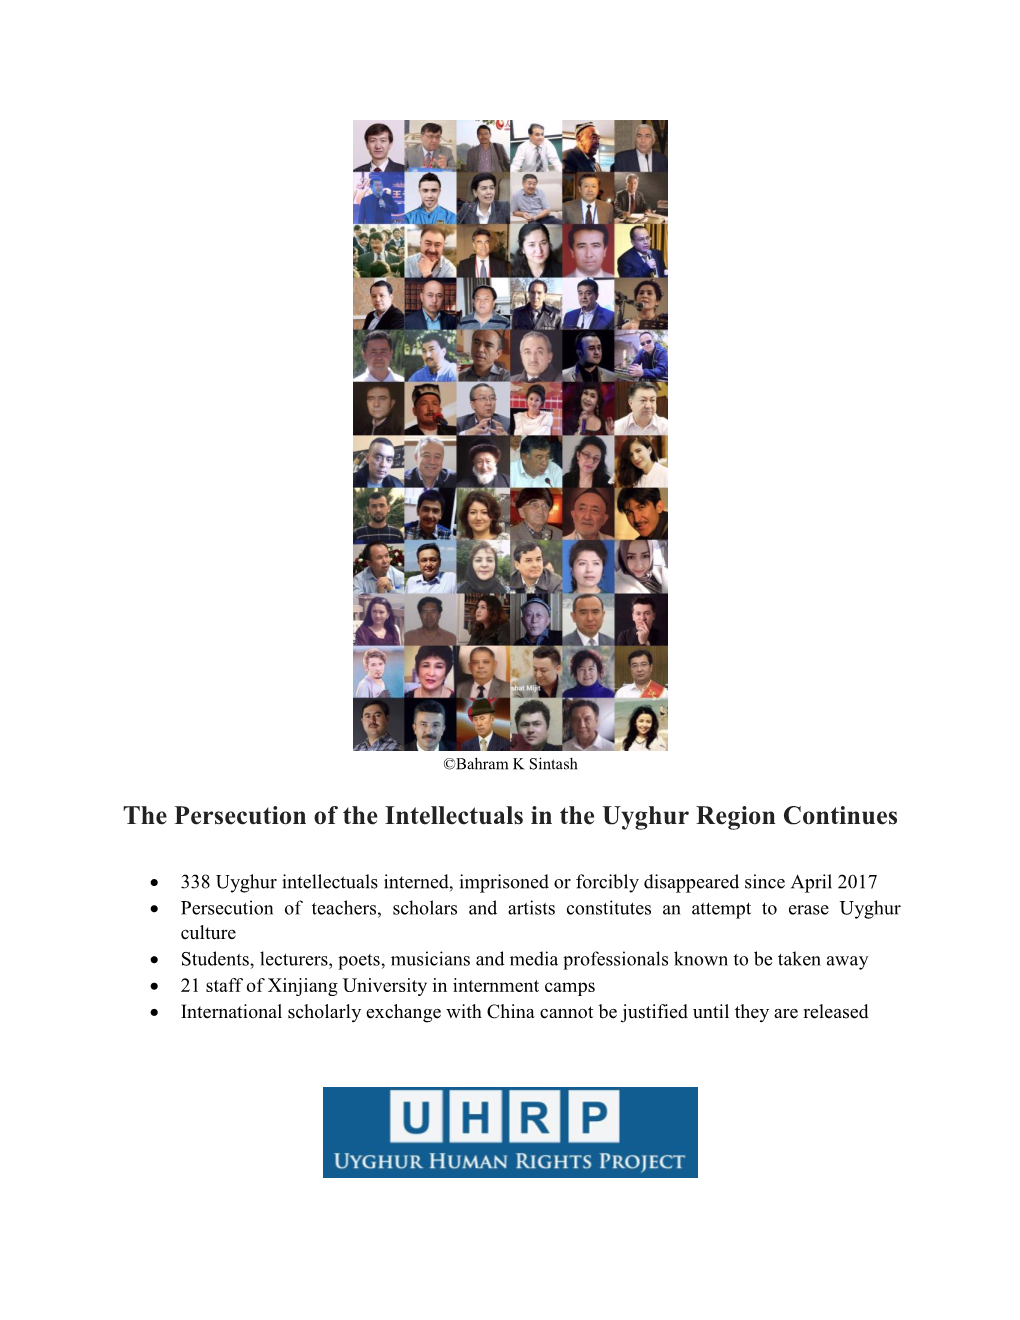 The Persecution of the Intellectuals in the Uyghur Region Continues